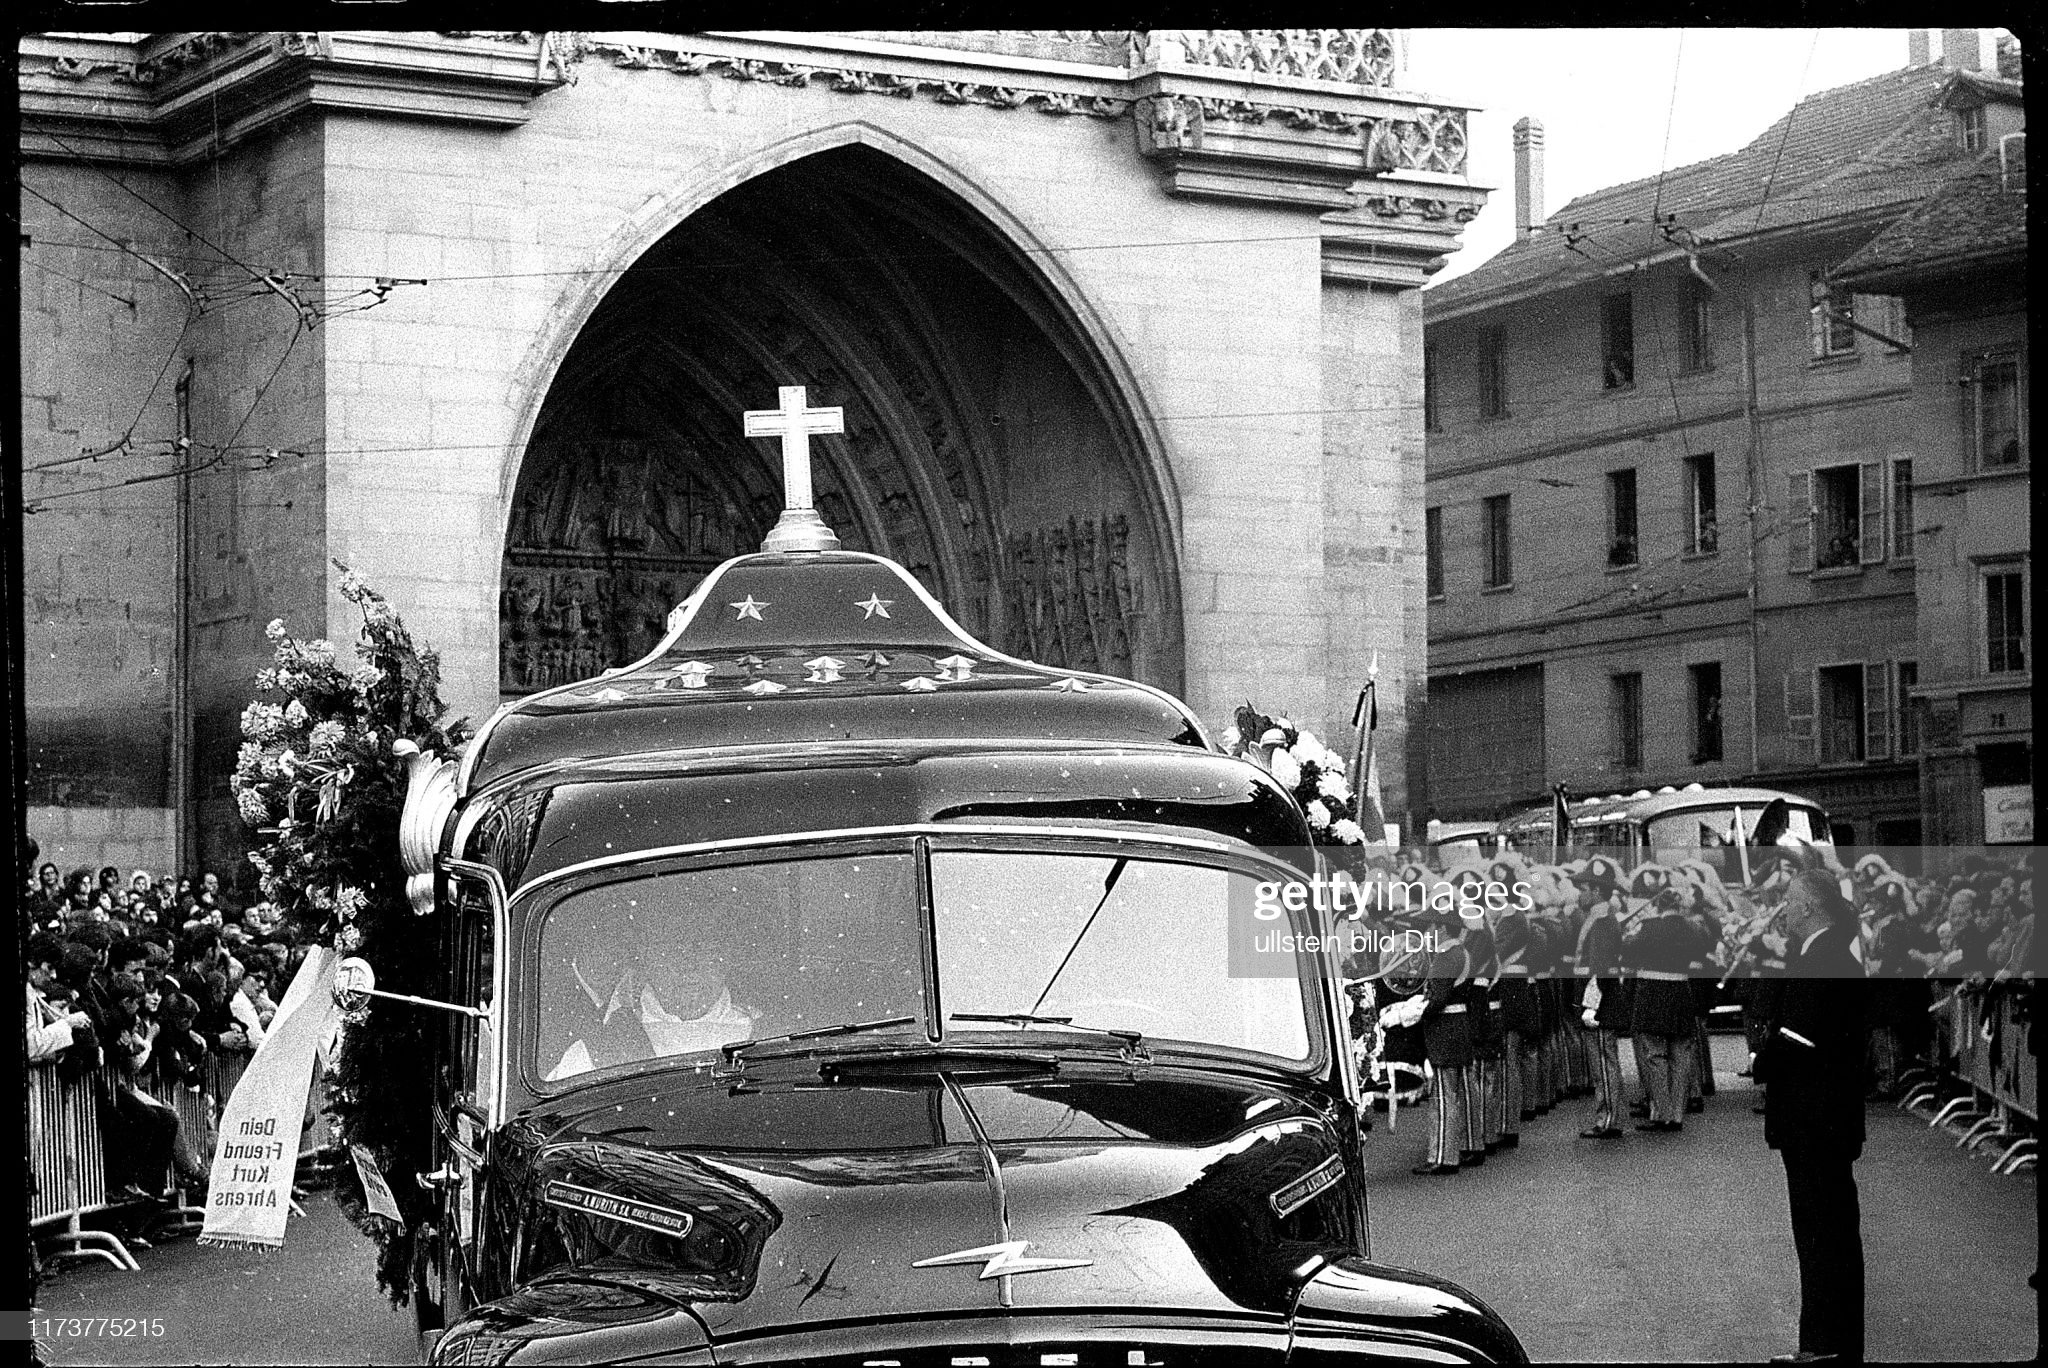 Jo Siffert's funeral, Fribourg, October 29, 1971.